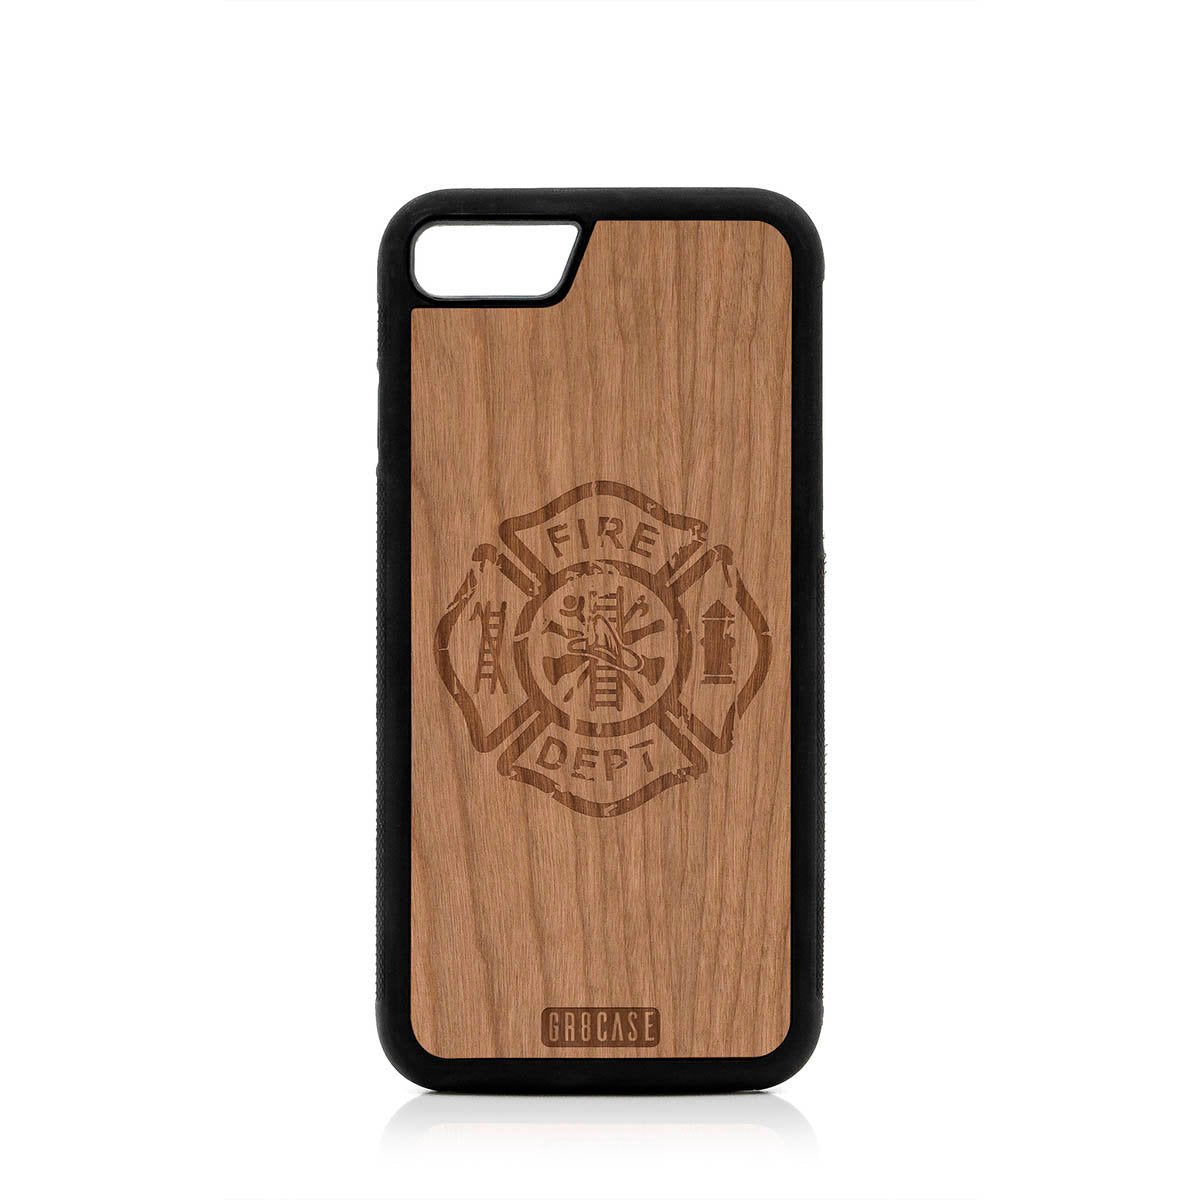 Fire Department Design Wood Case For iPhone SE 2020 by GR8CASE